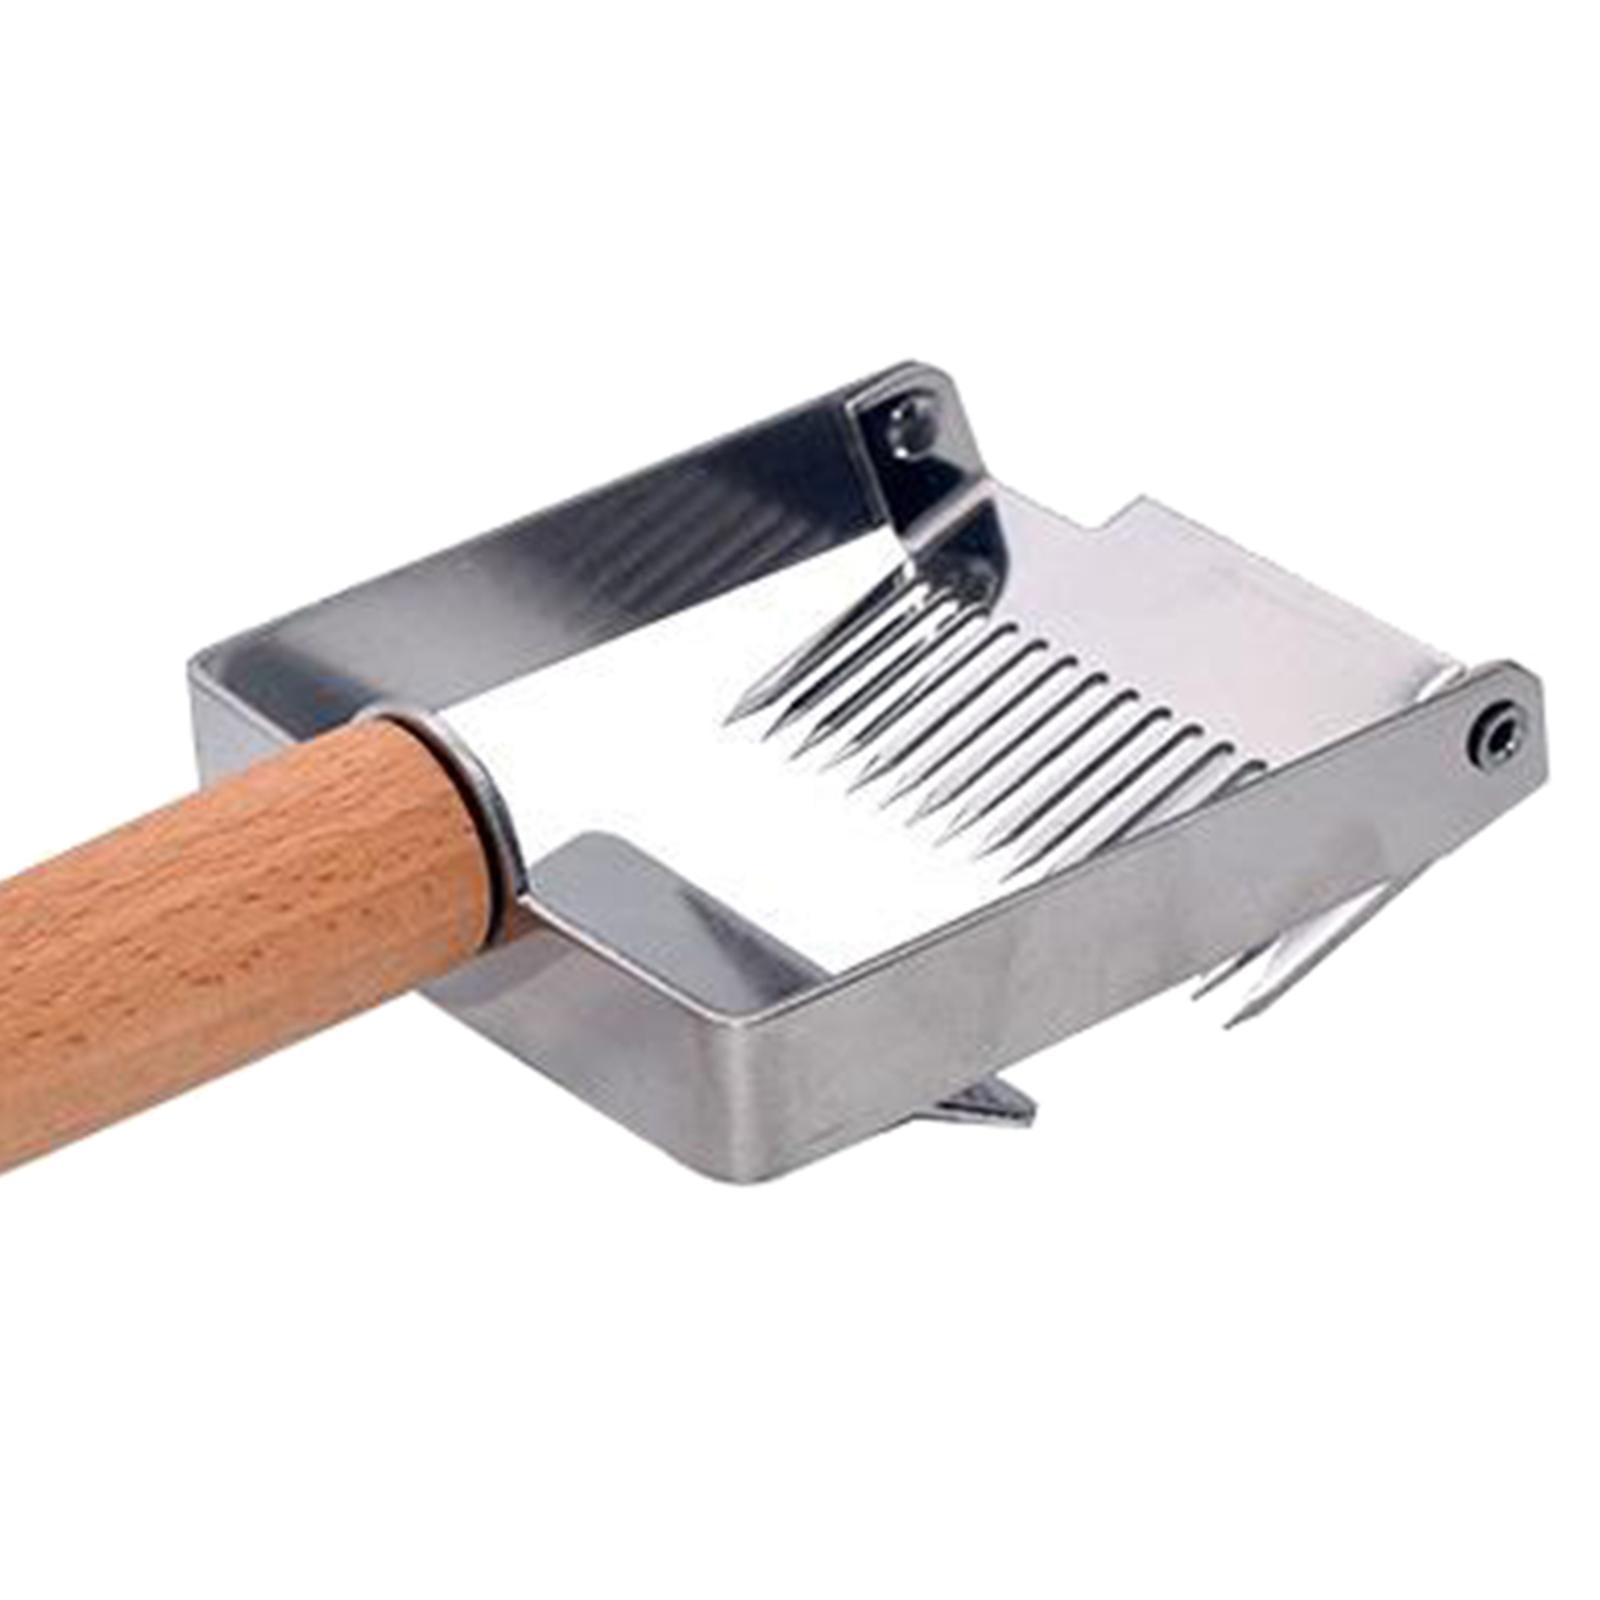 New Stainless Steel Bee Hive Uncapping Honey Fork Scraper Shovel Tool Beekeeping 